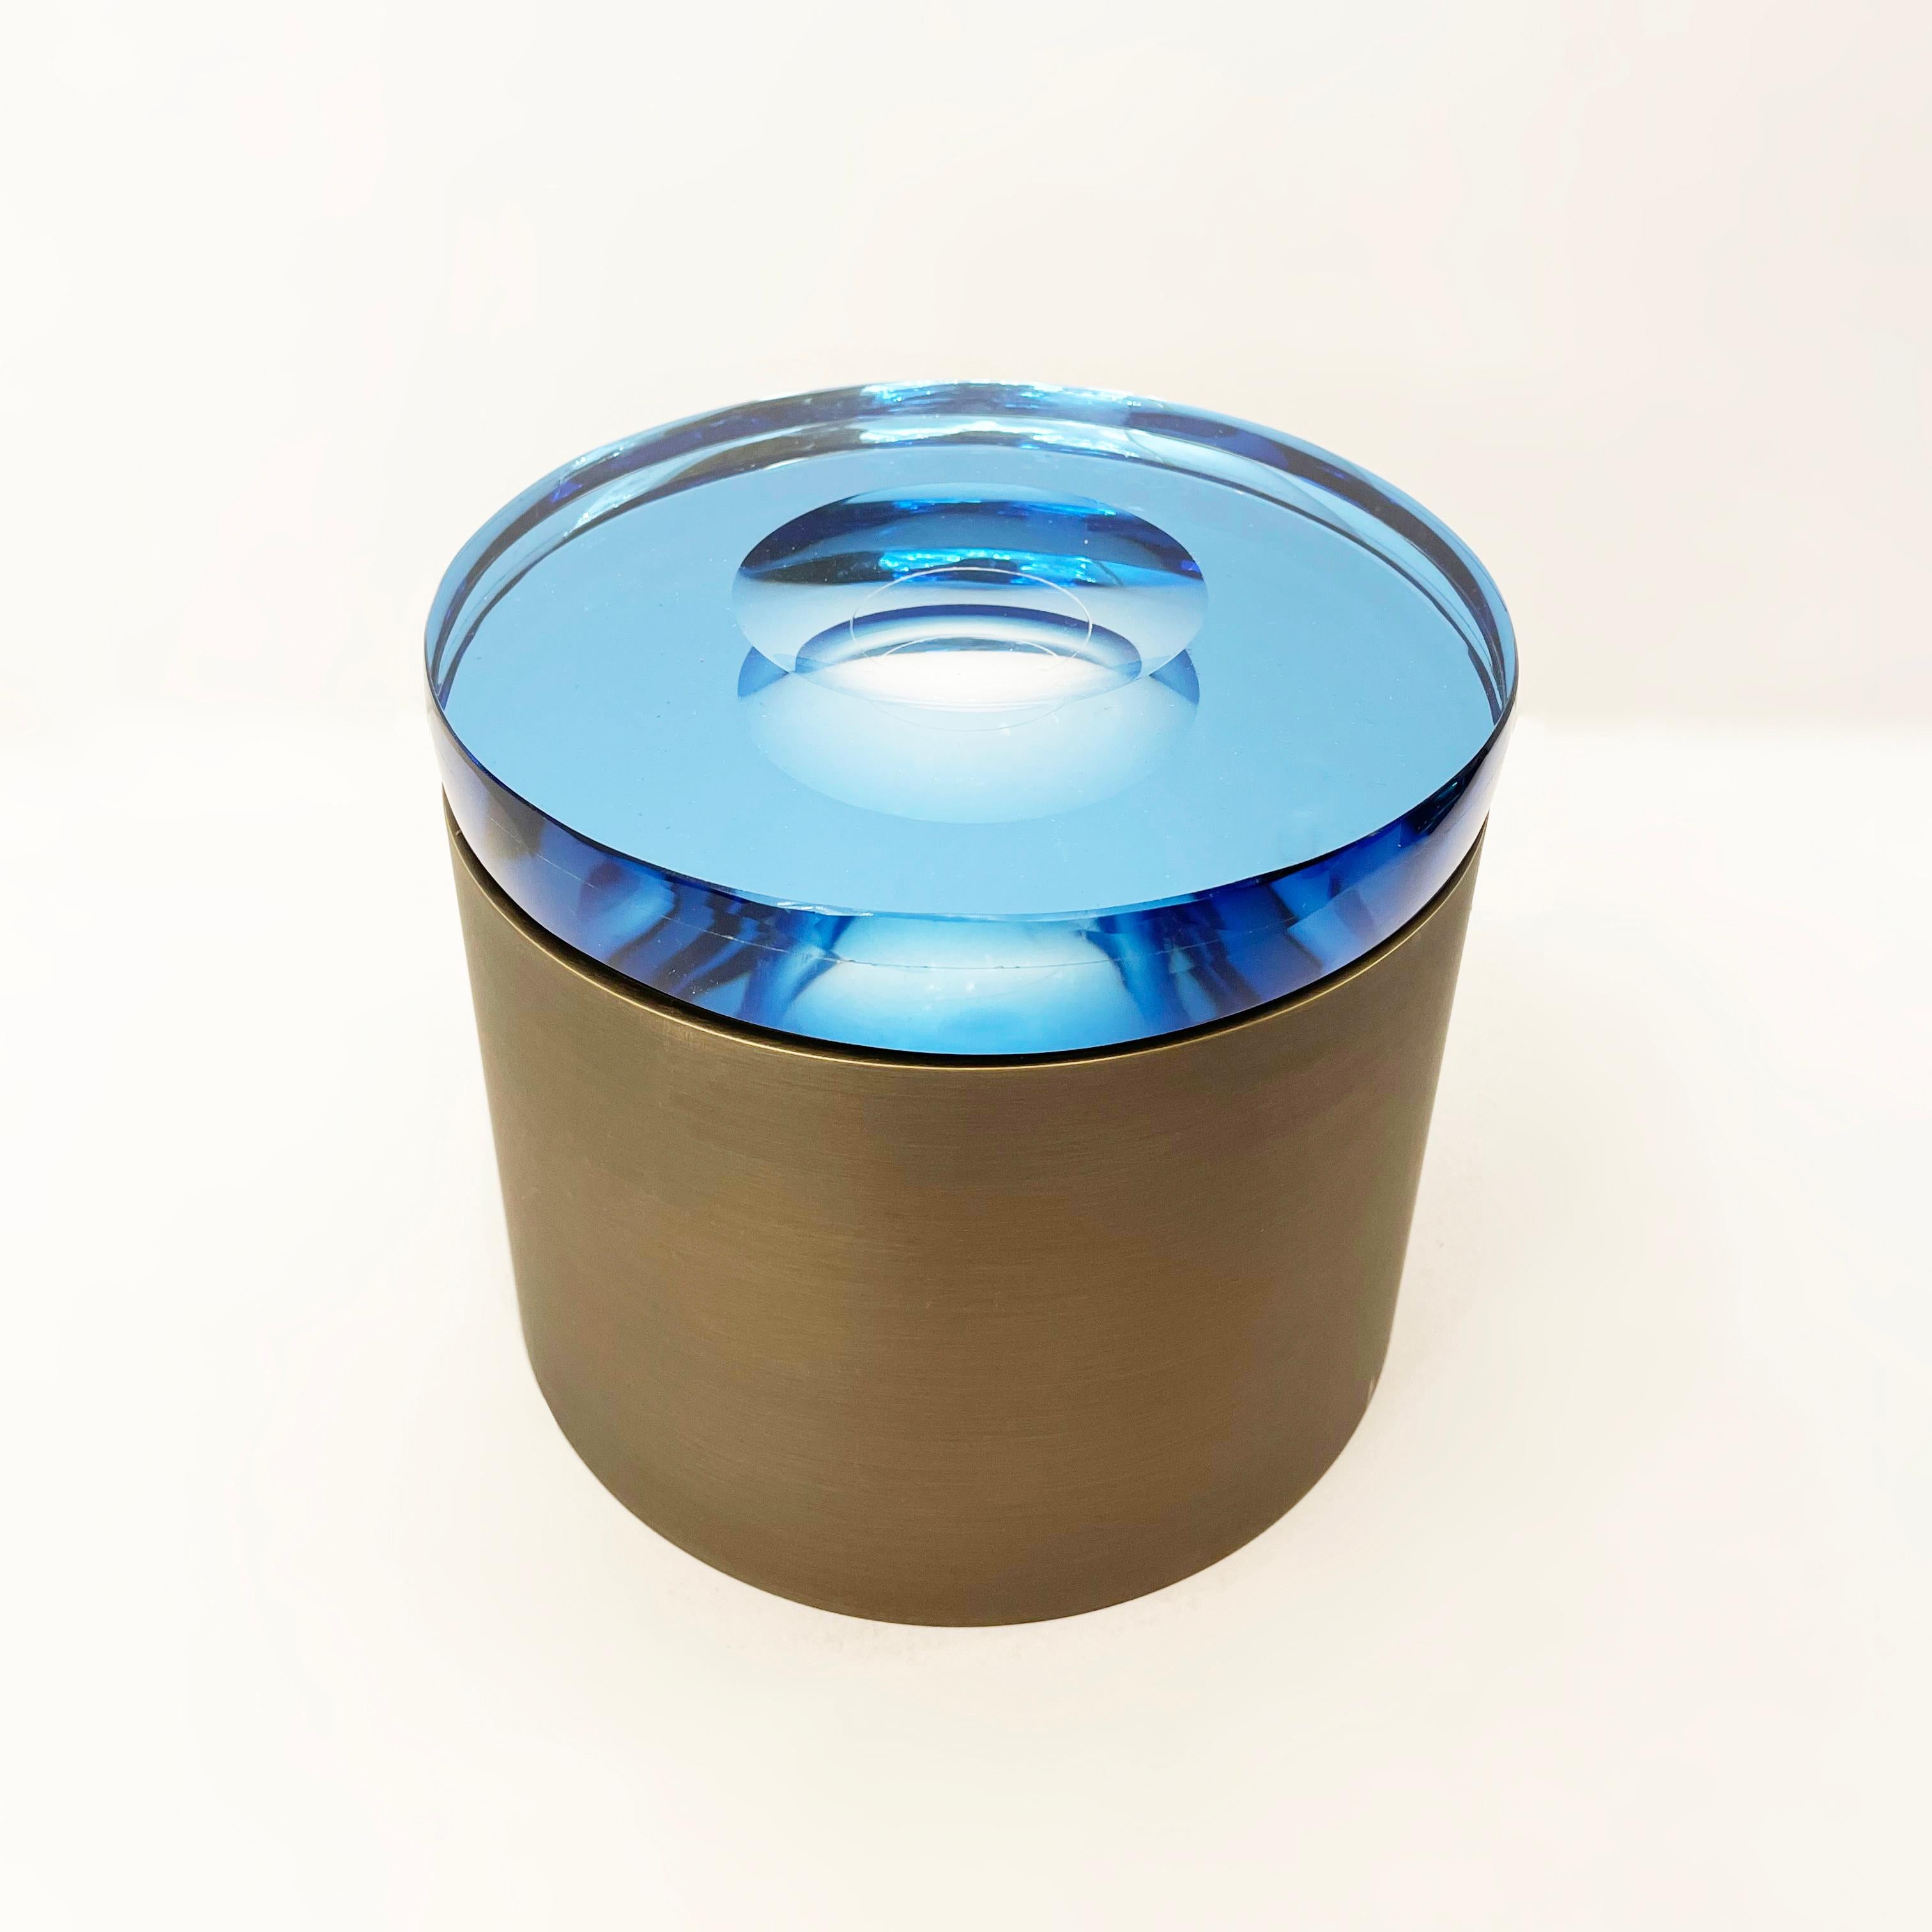 Modern Candela Glass Box by Form A, Blue Glass and Bronze Base